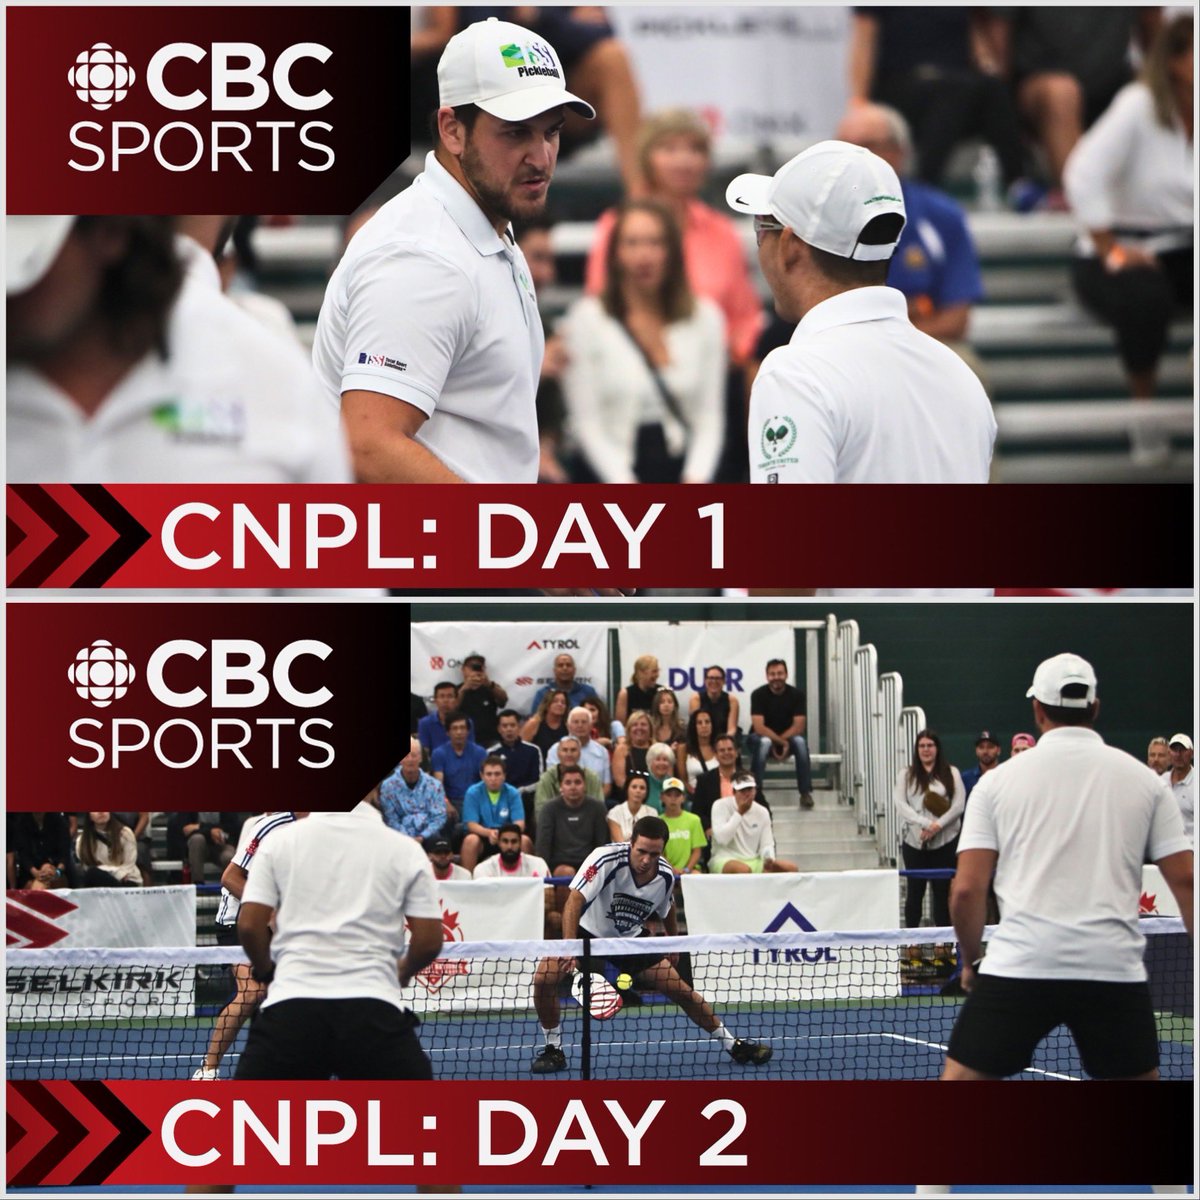 🚨 CNPL SZN2 x @cbcsports 🚨
-
We are thrilled to announce CNPL’s Eastern Split kicking off SZN2 at One Health Clubs will be live-streamed on CBC Sports‼️ Tune in May 25-26 to get in on 🇨🇦’s premier #propickleball action 📲🖥️📺
.
.
.
#pickleball #pickleballcanada #pickleballnews